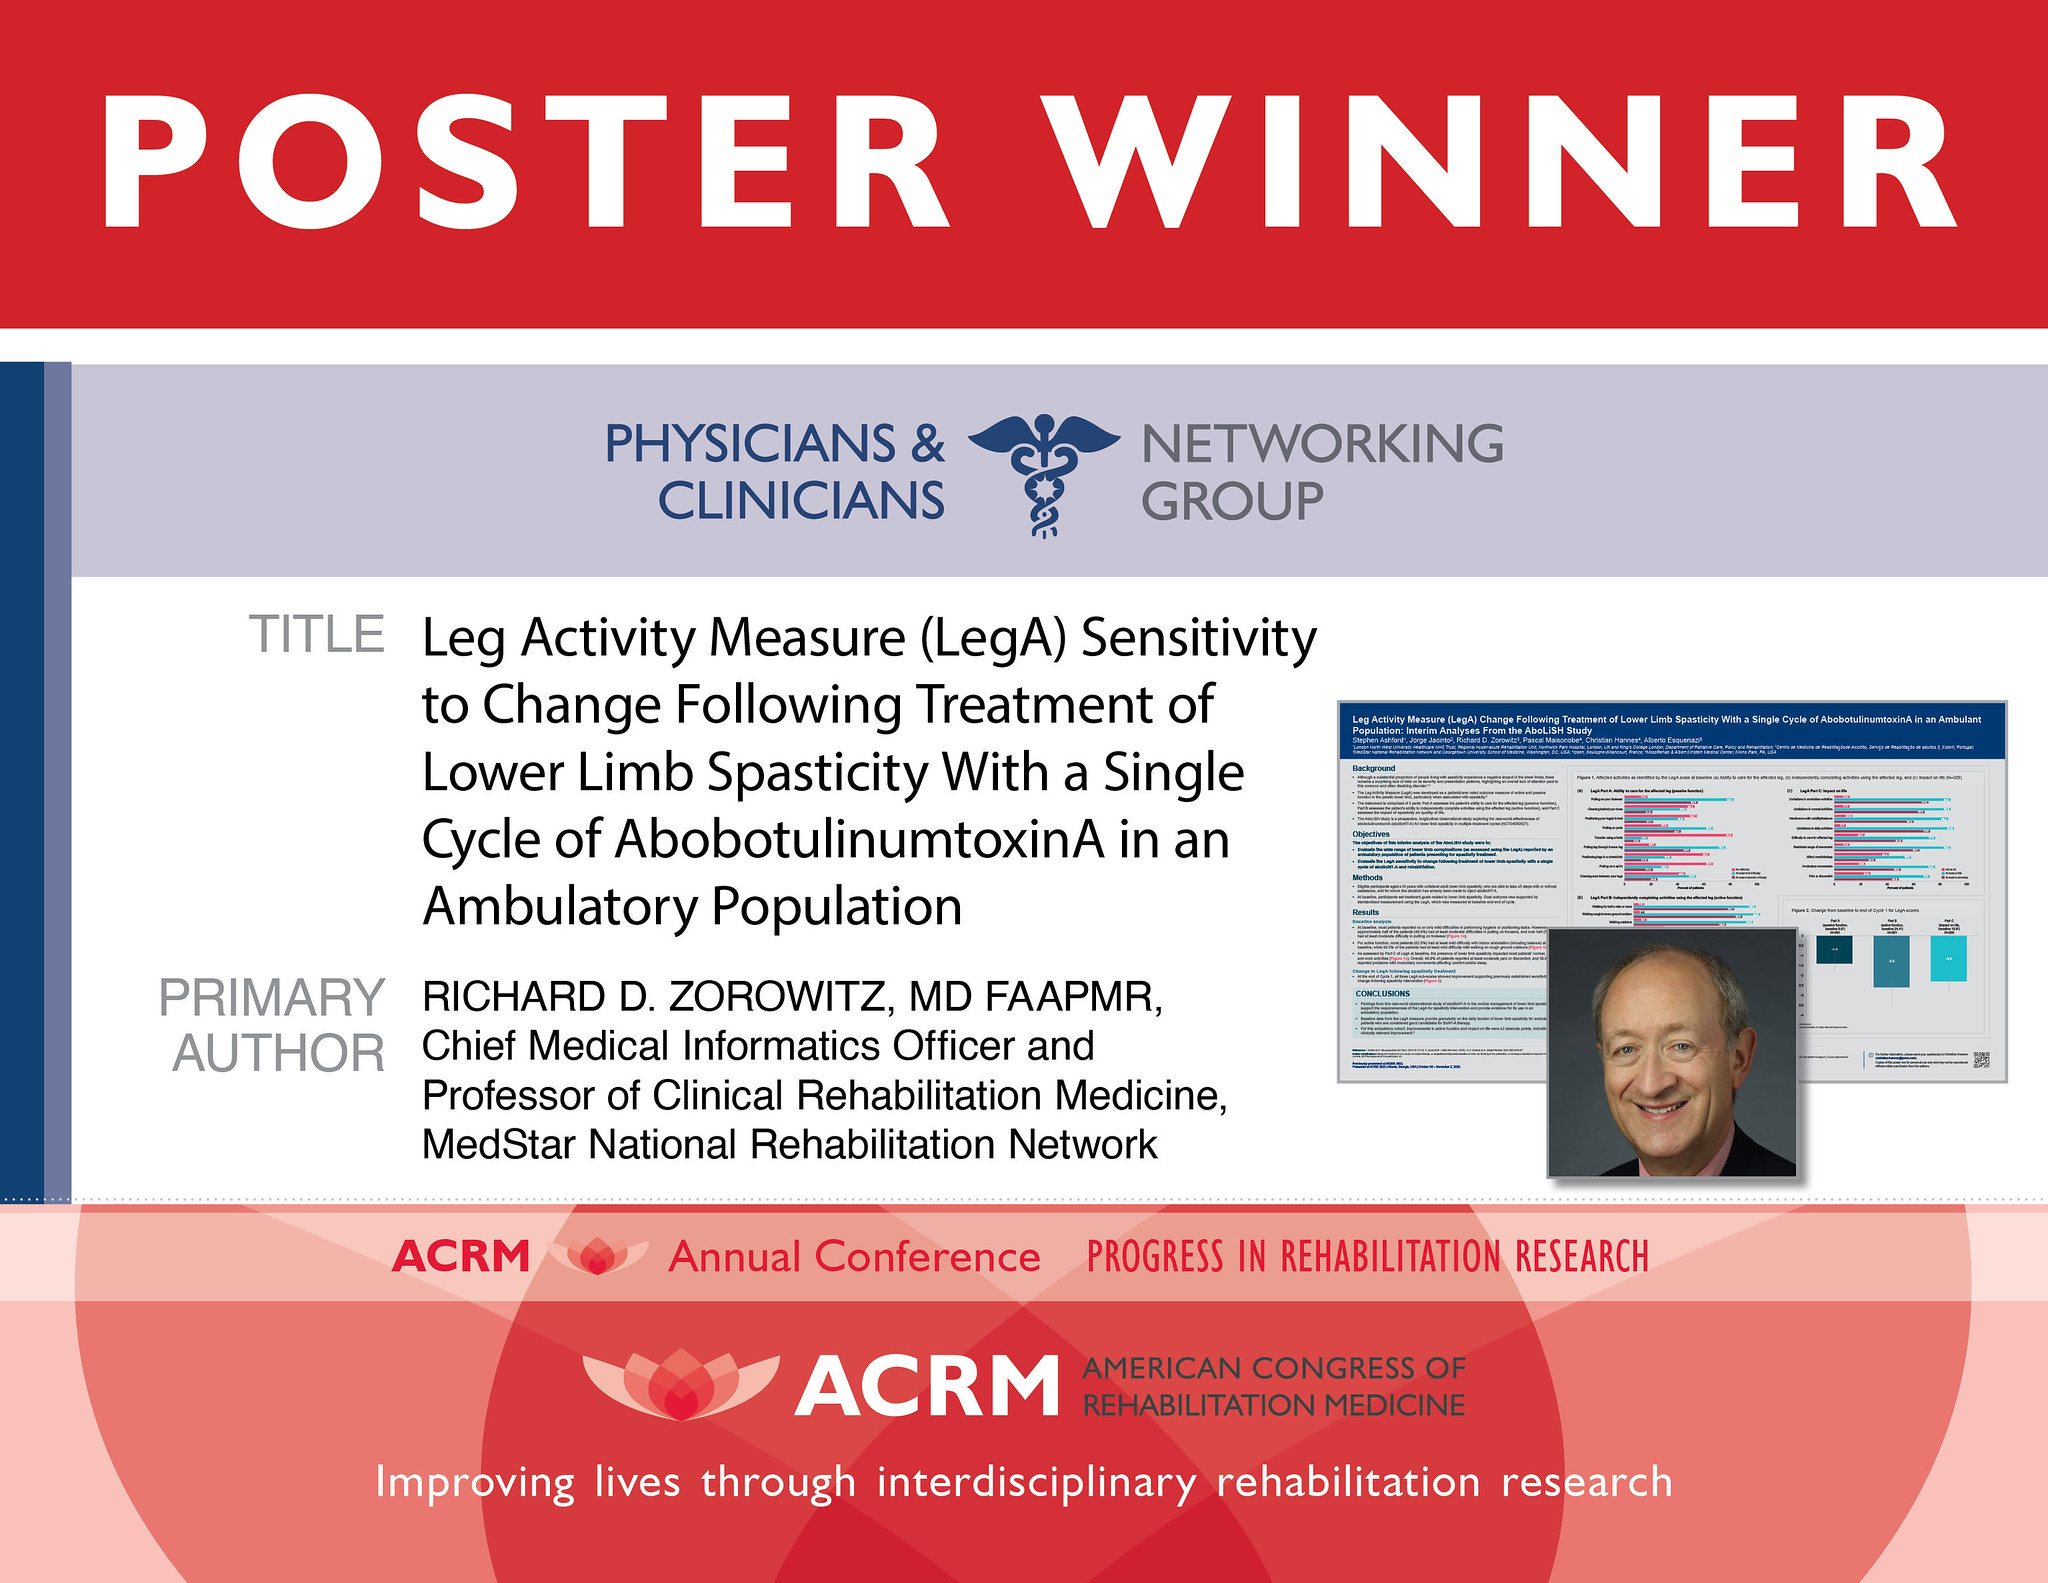 Physician and Clinicians Networking Group Poster Award